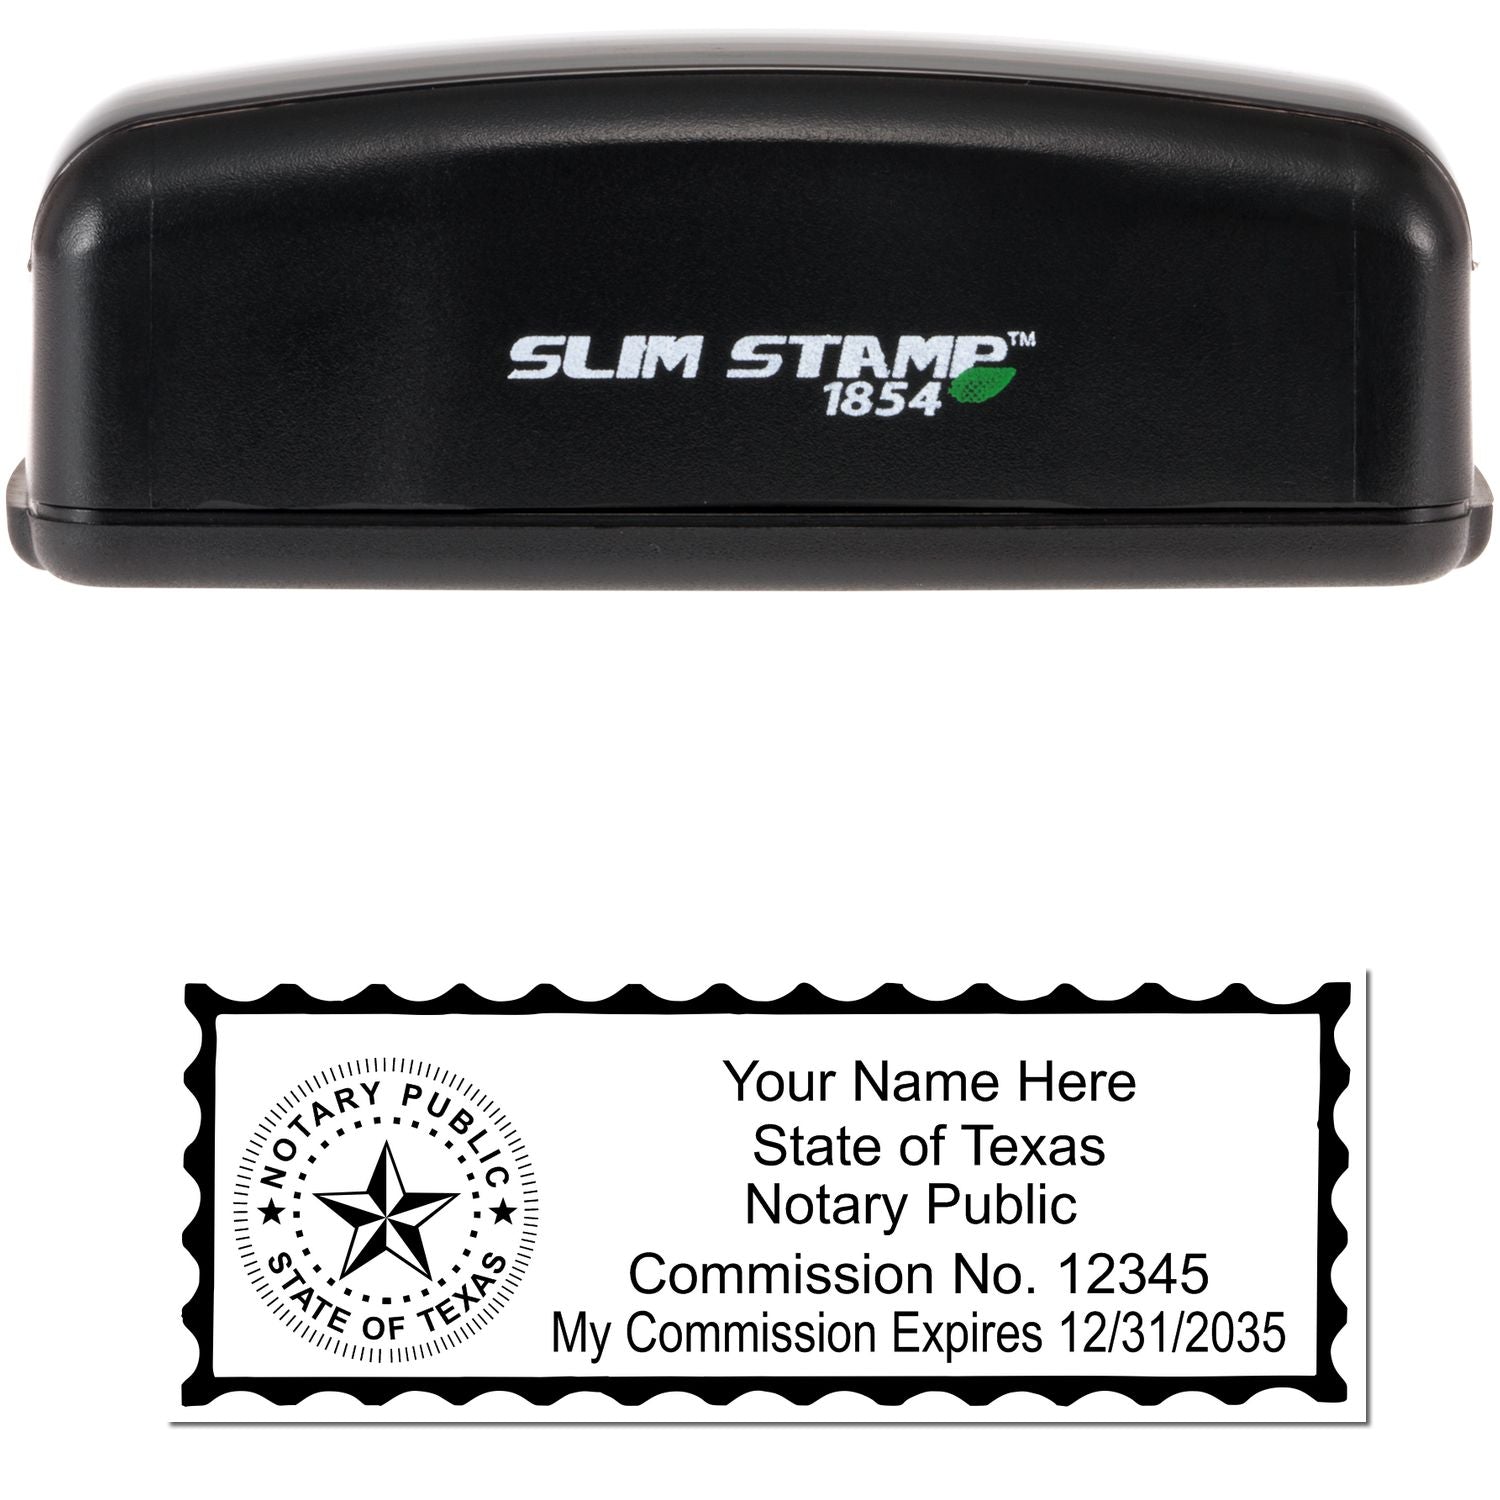 The main image for the Slim Pre-Inked State Seal Notary Stamp for Texas depicting a sample of the imprint and electronic files